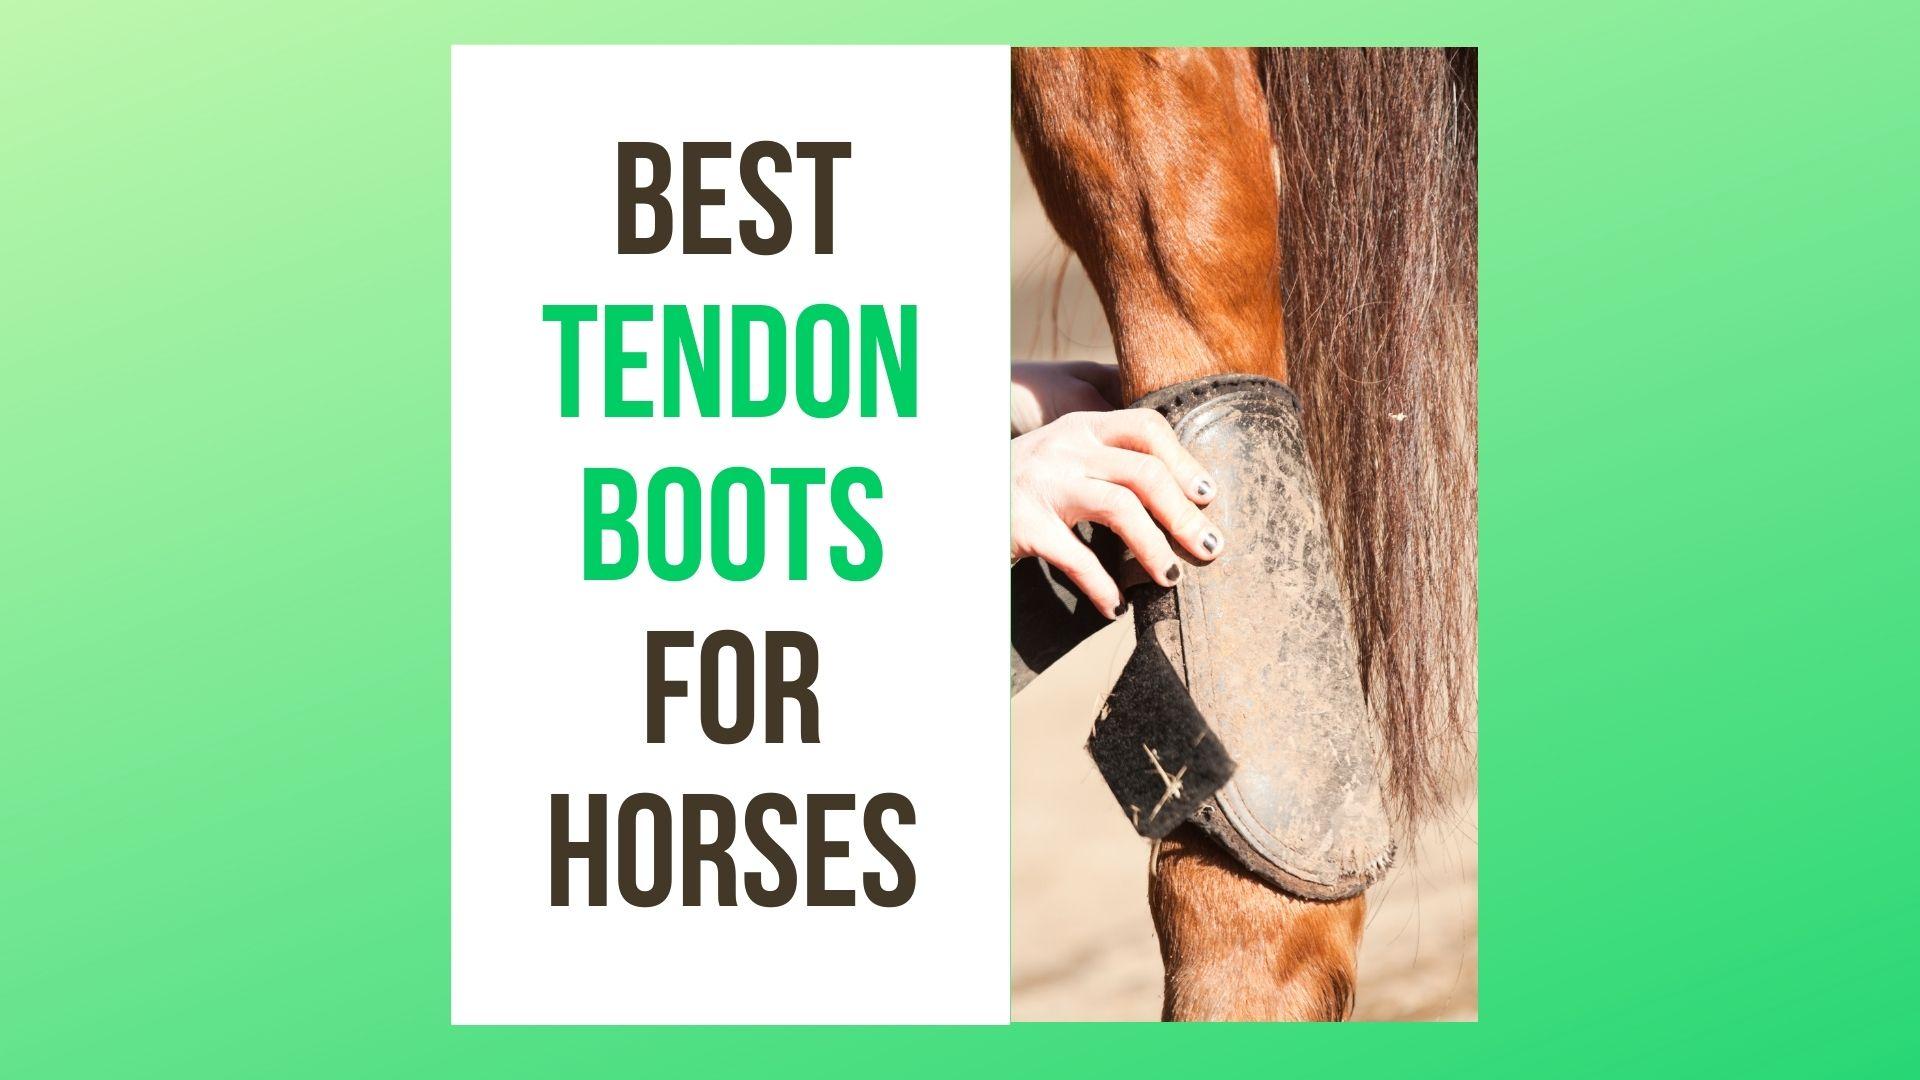 Best Tendon Boots for Horses